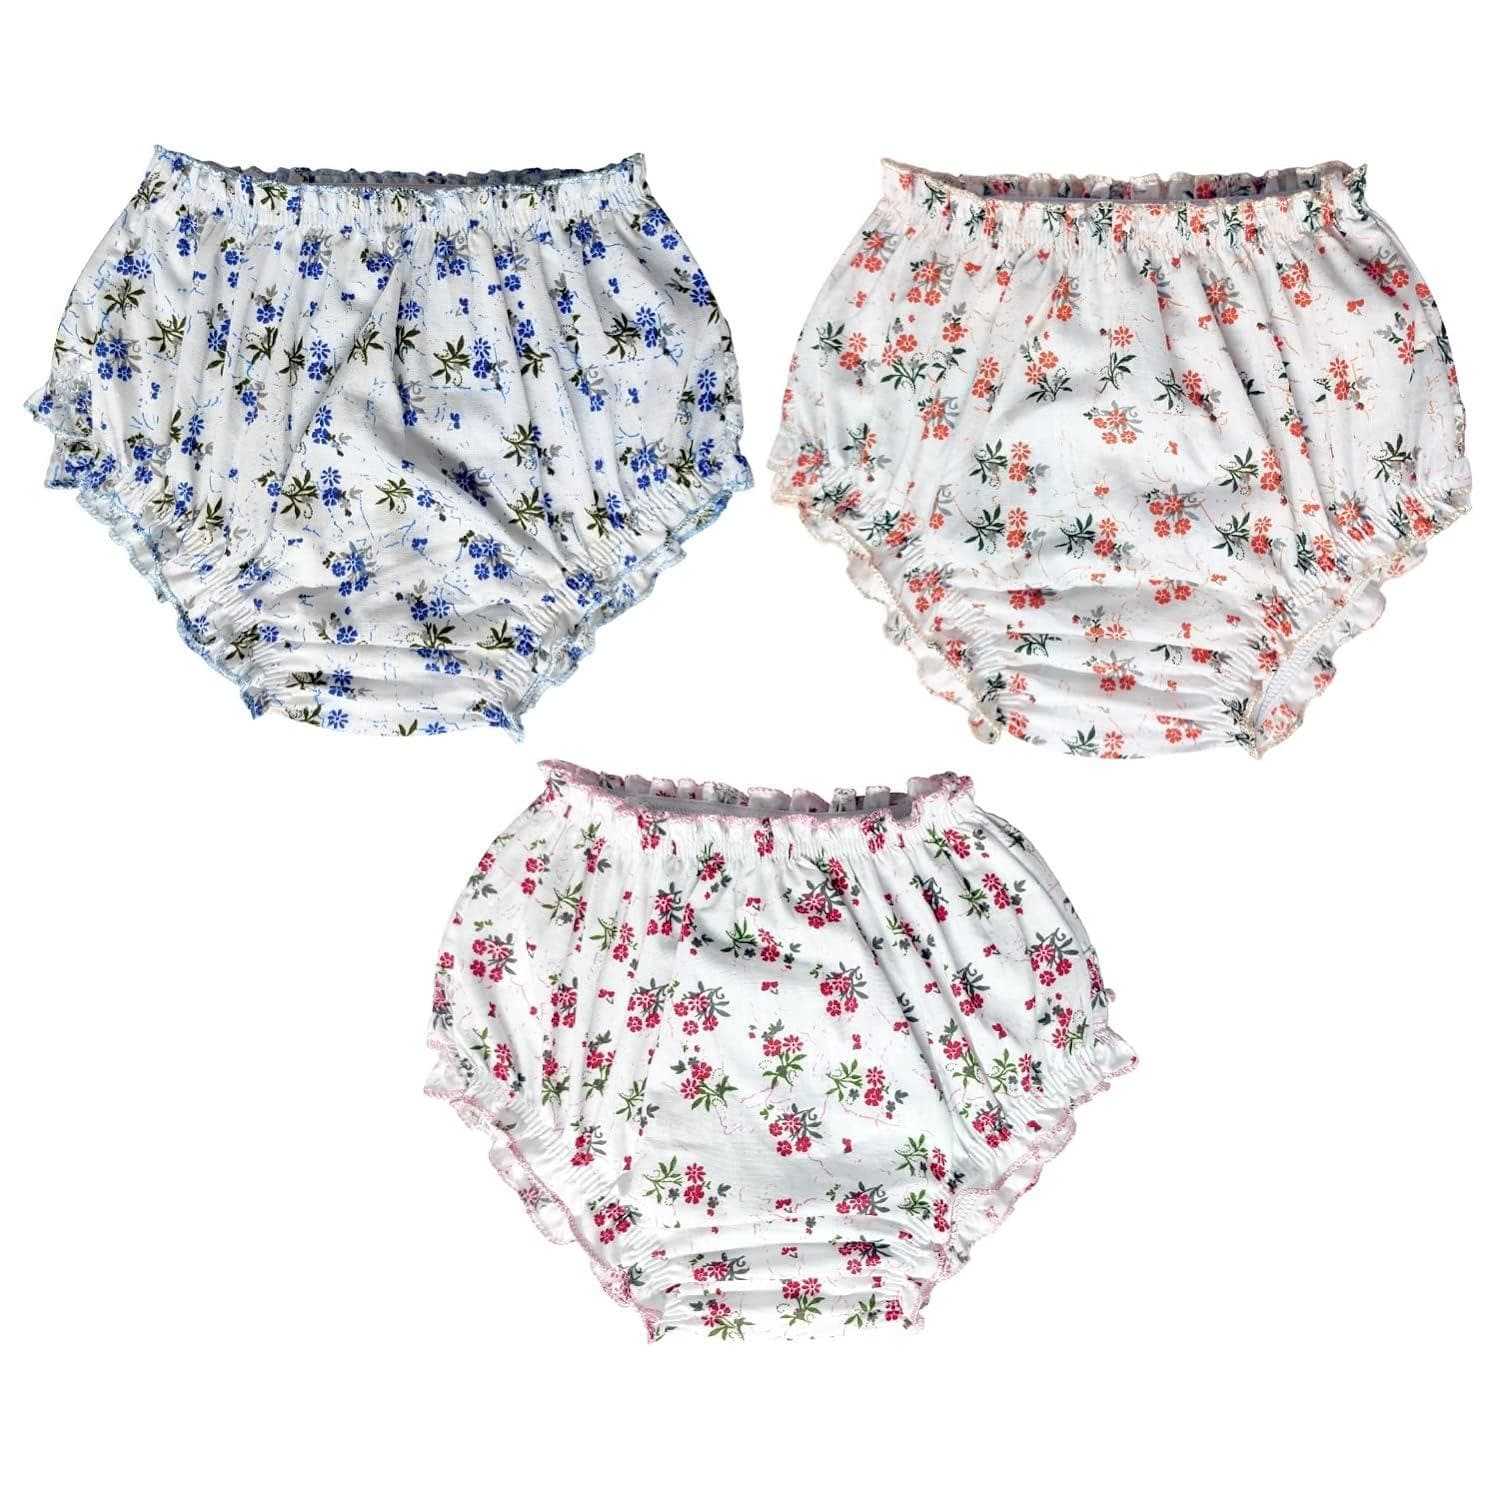 KIDS & BEBS Baby Girl's Cotton Multicolor And Multiprint Panties with Frill, Pack of 3 (Flower Print Frill Panty, 9-12 Months) - halfpeapp